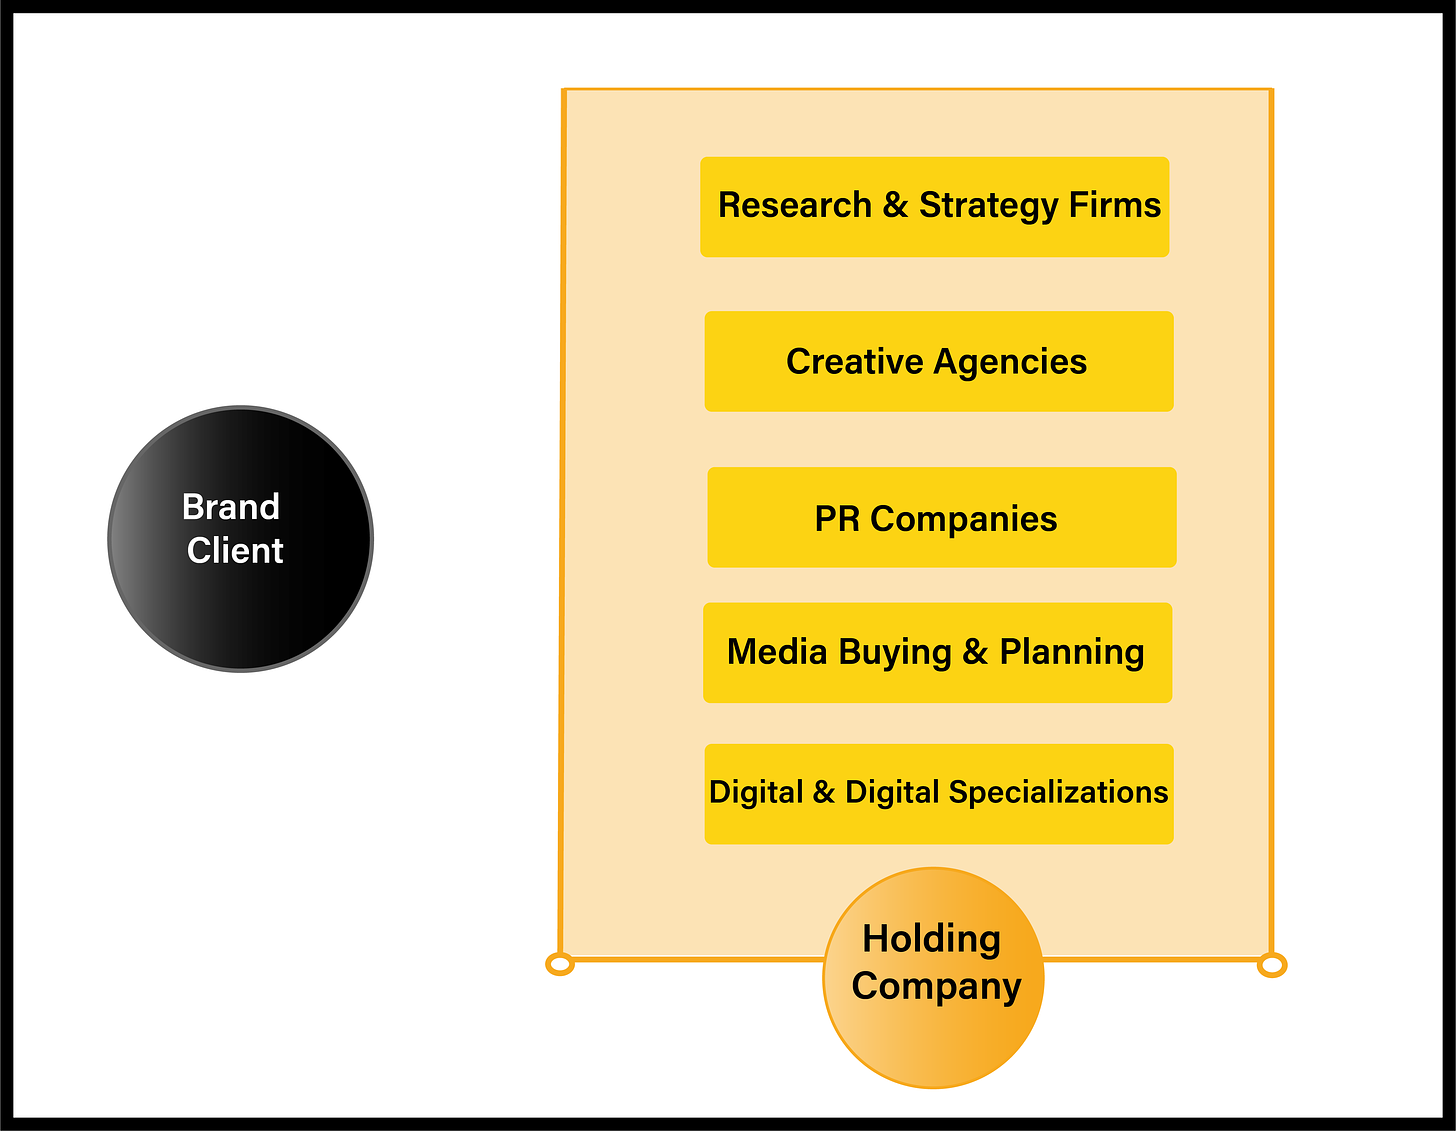 A diagram of a Holding Company conglomerate and the types of service providers it contains, as well as a Brand Client